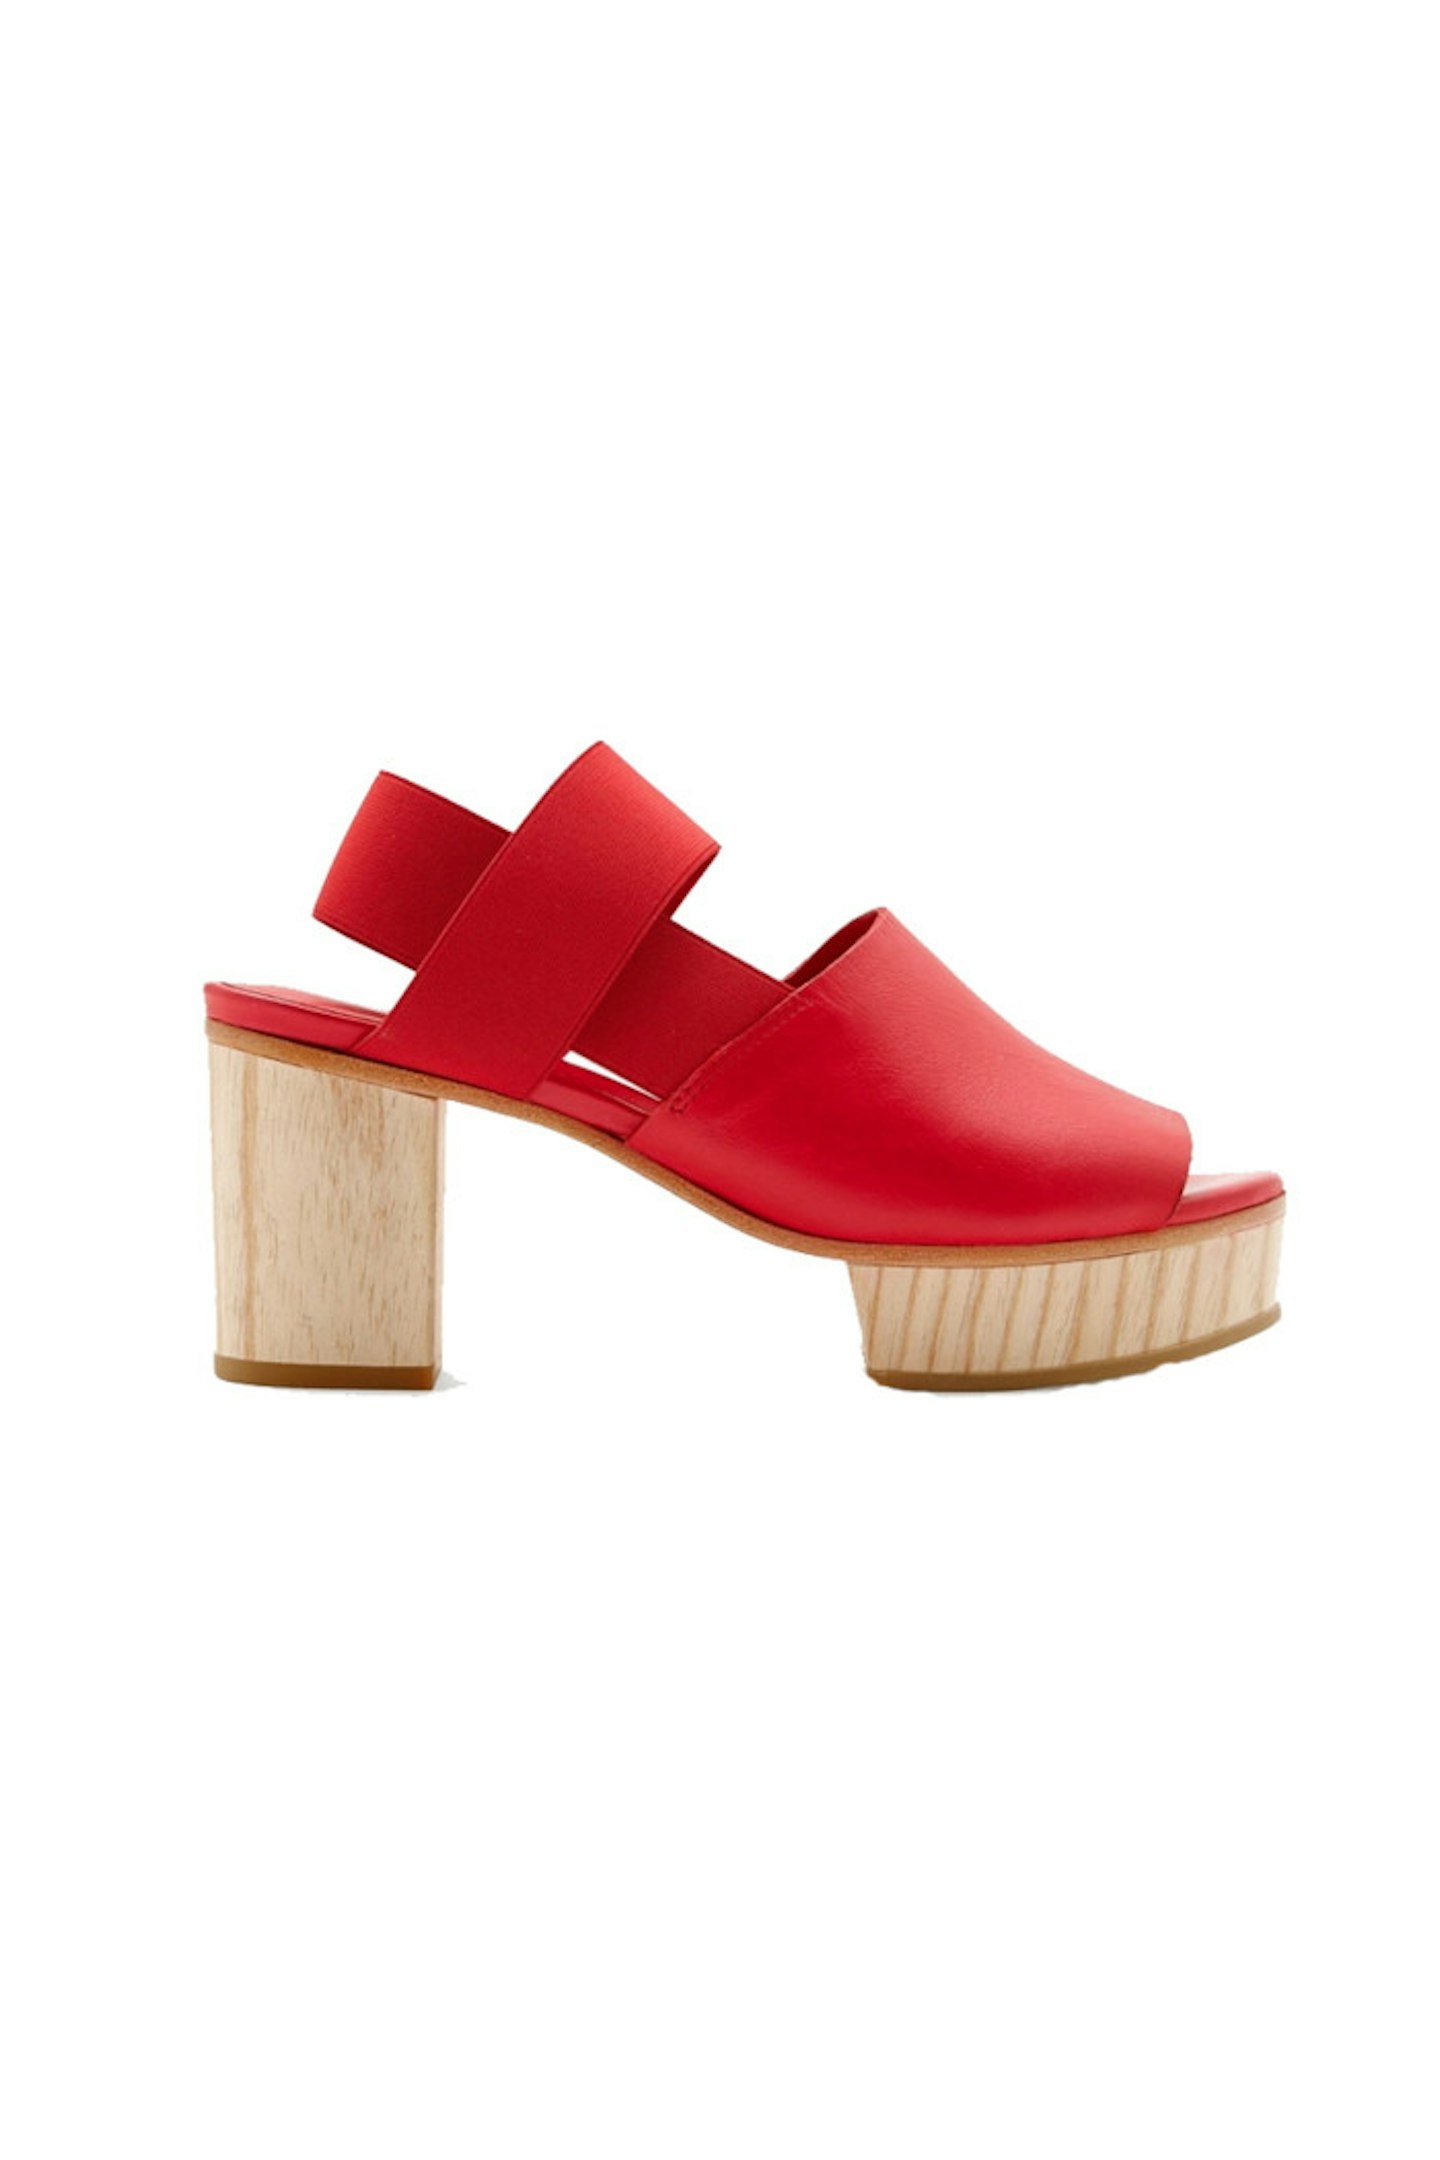 A bright sandal will give any outfit an instant lift. Wear this pair with voluminous culottes, the thick sole are perfect for added height.